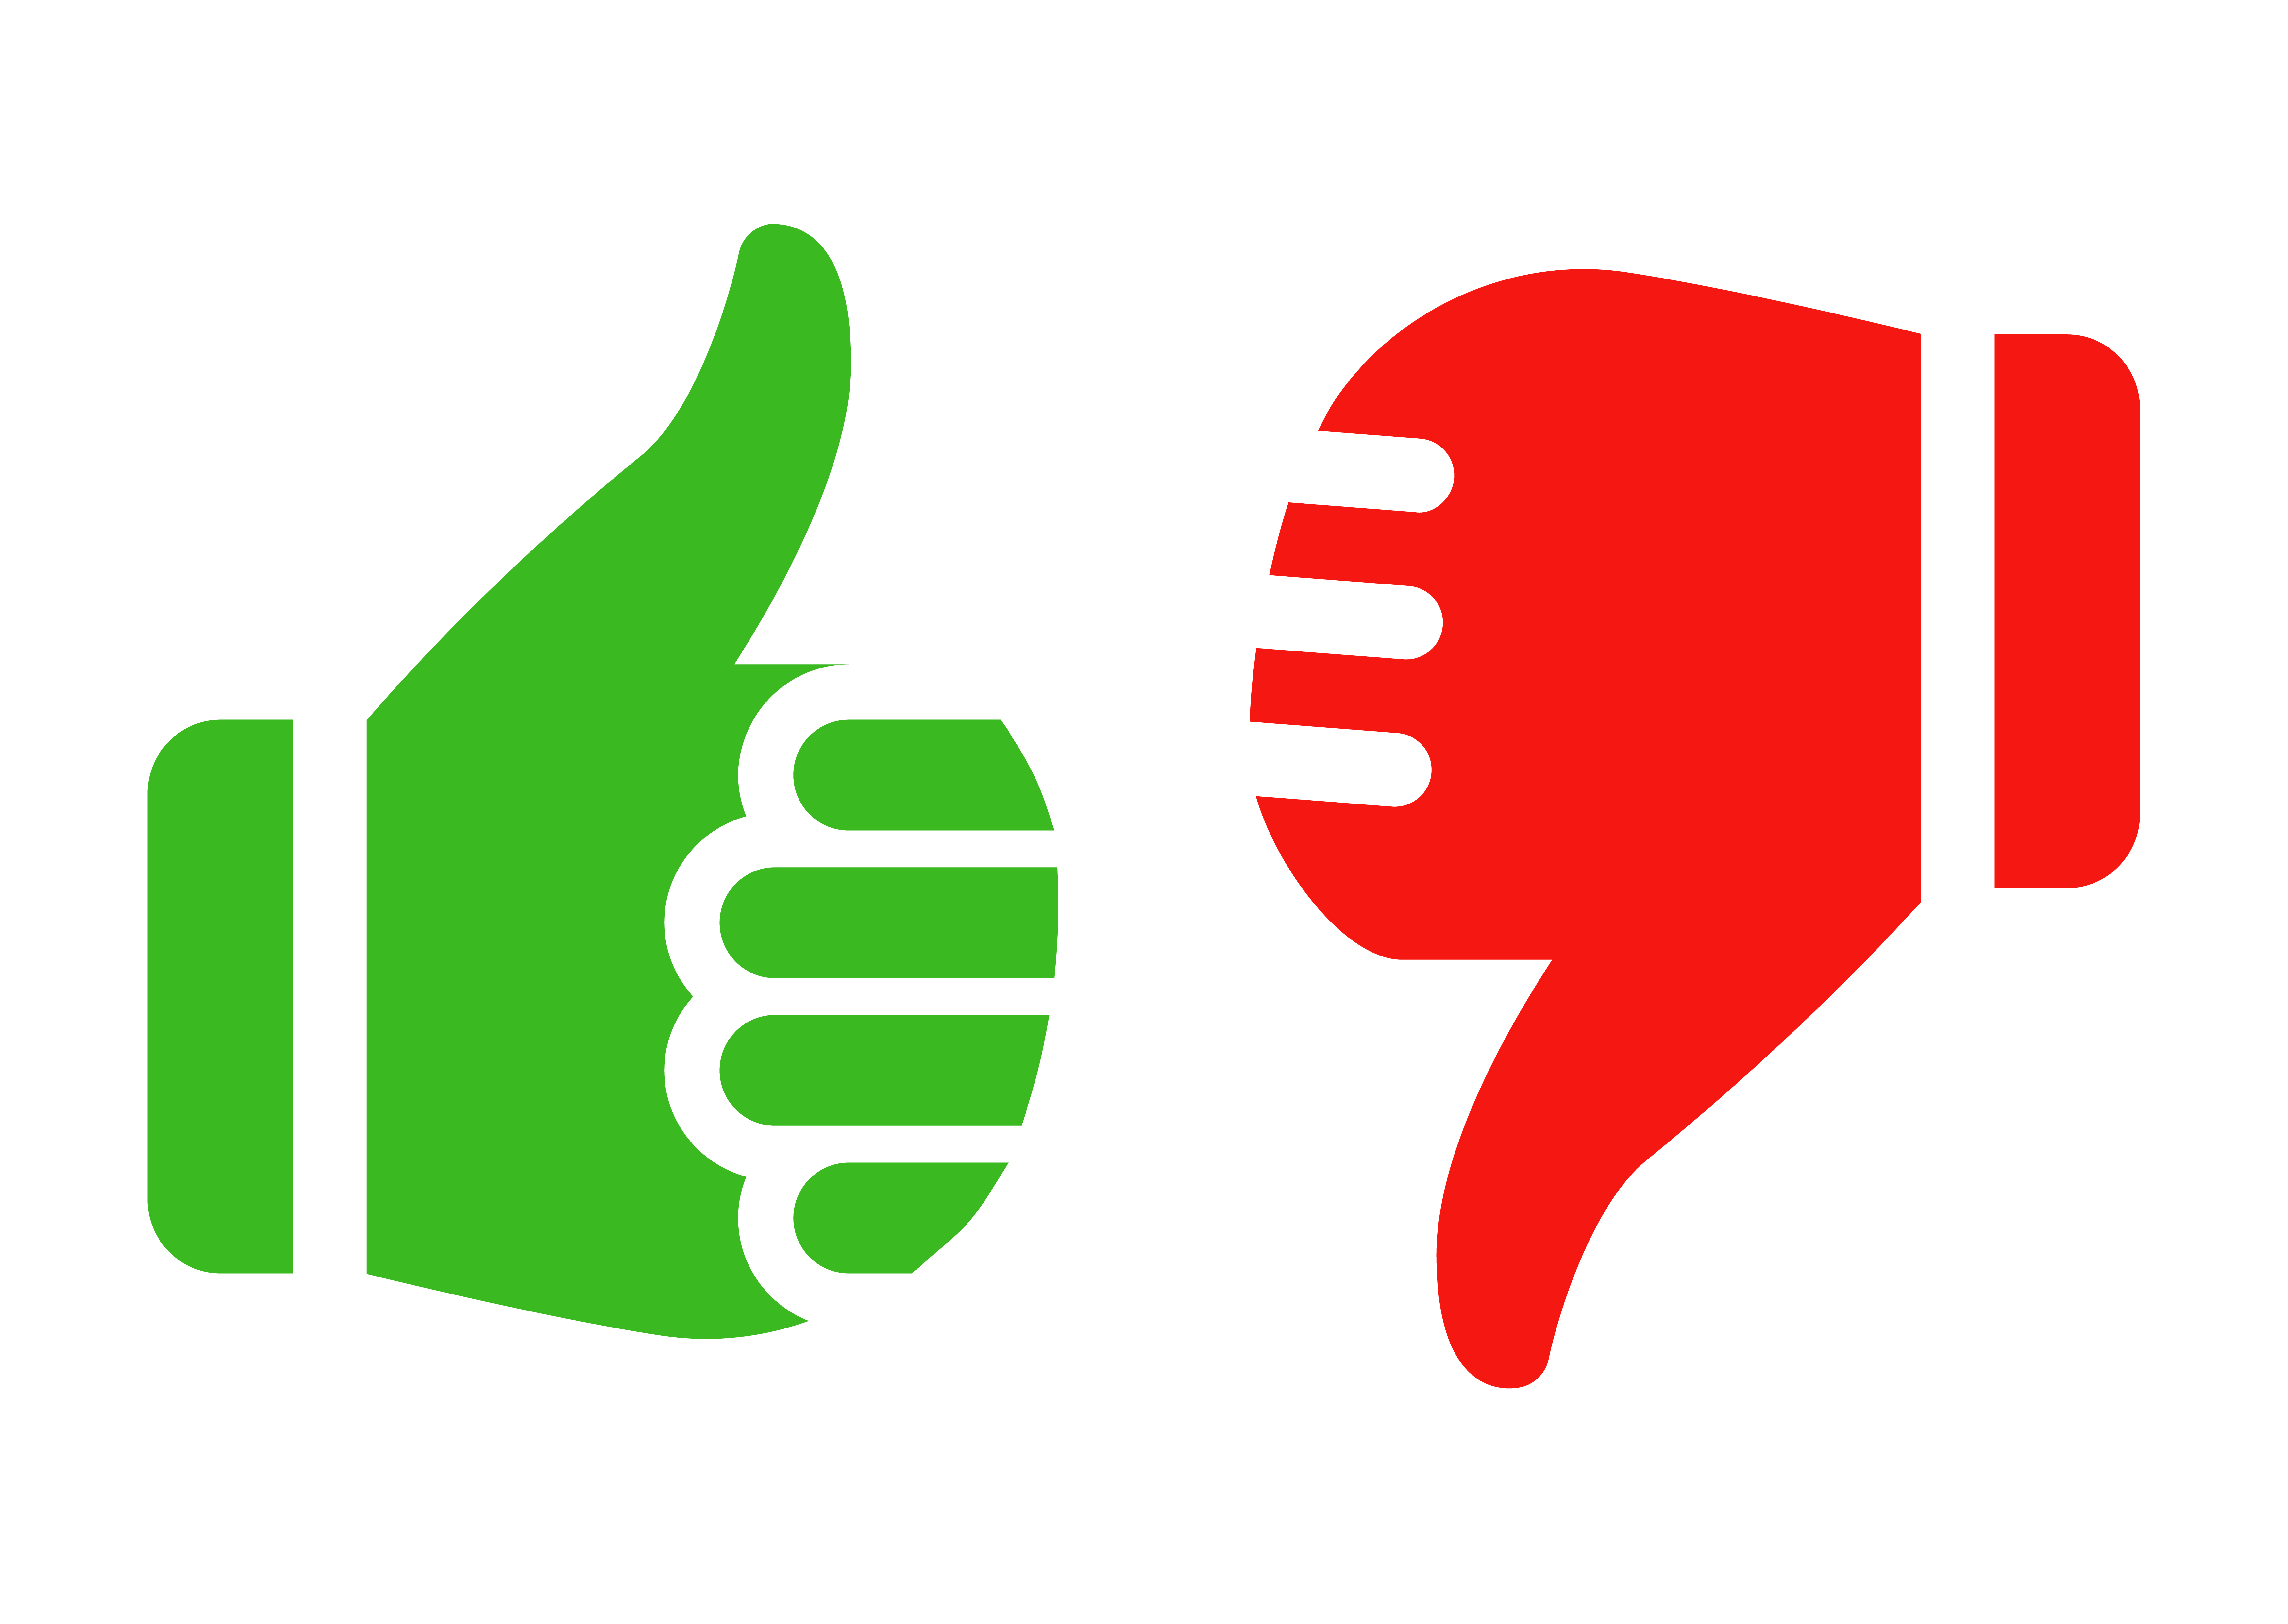 Thumbs up down clipart